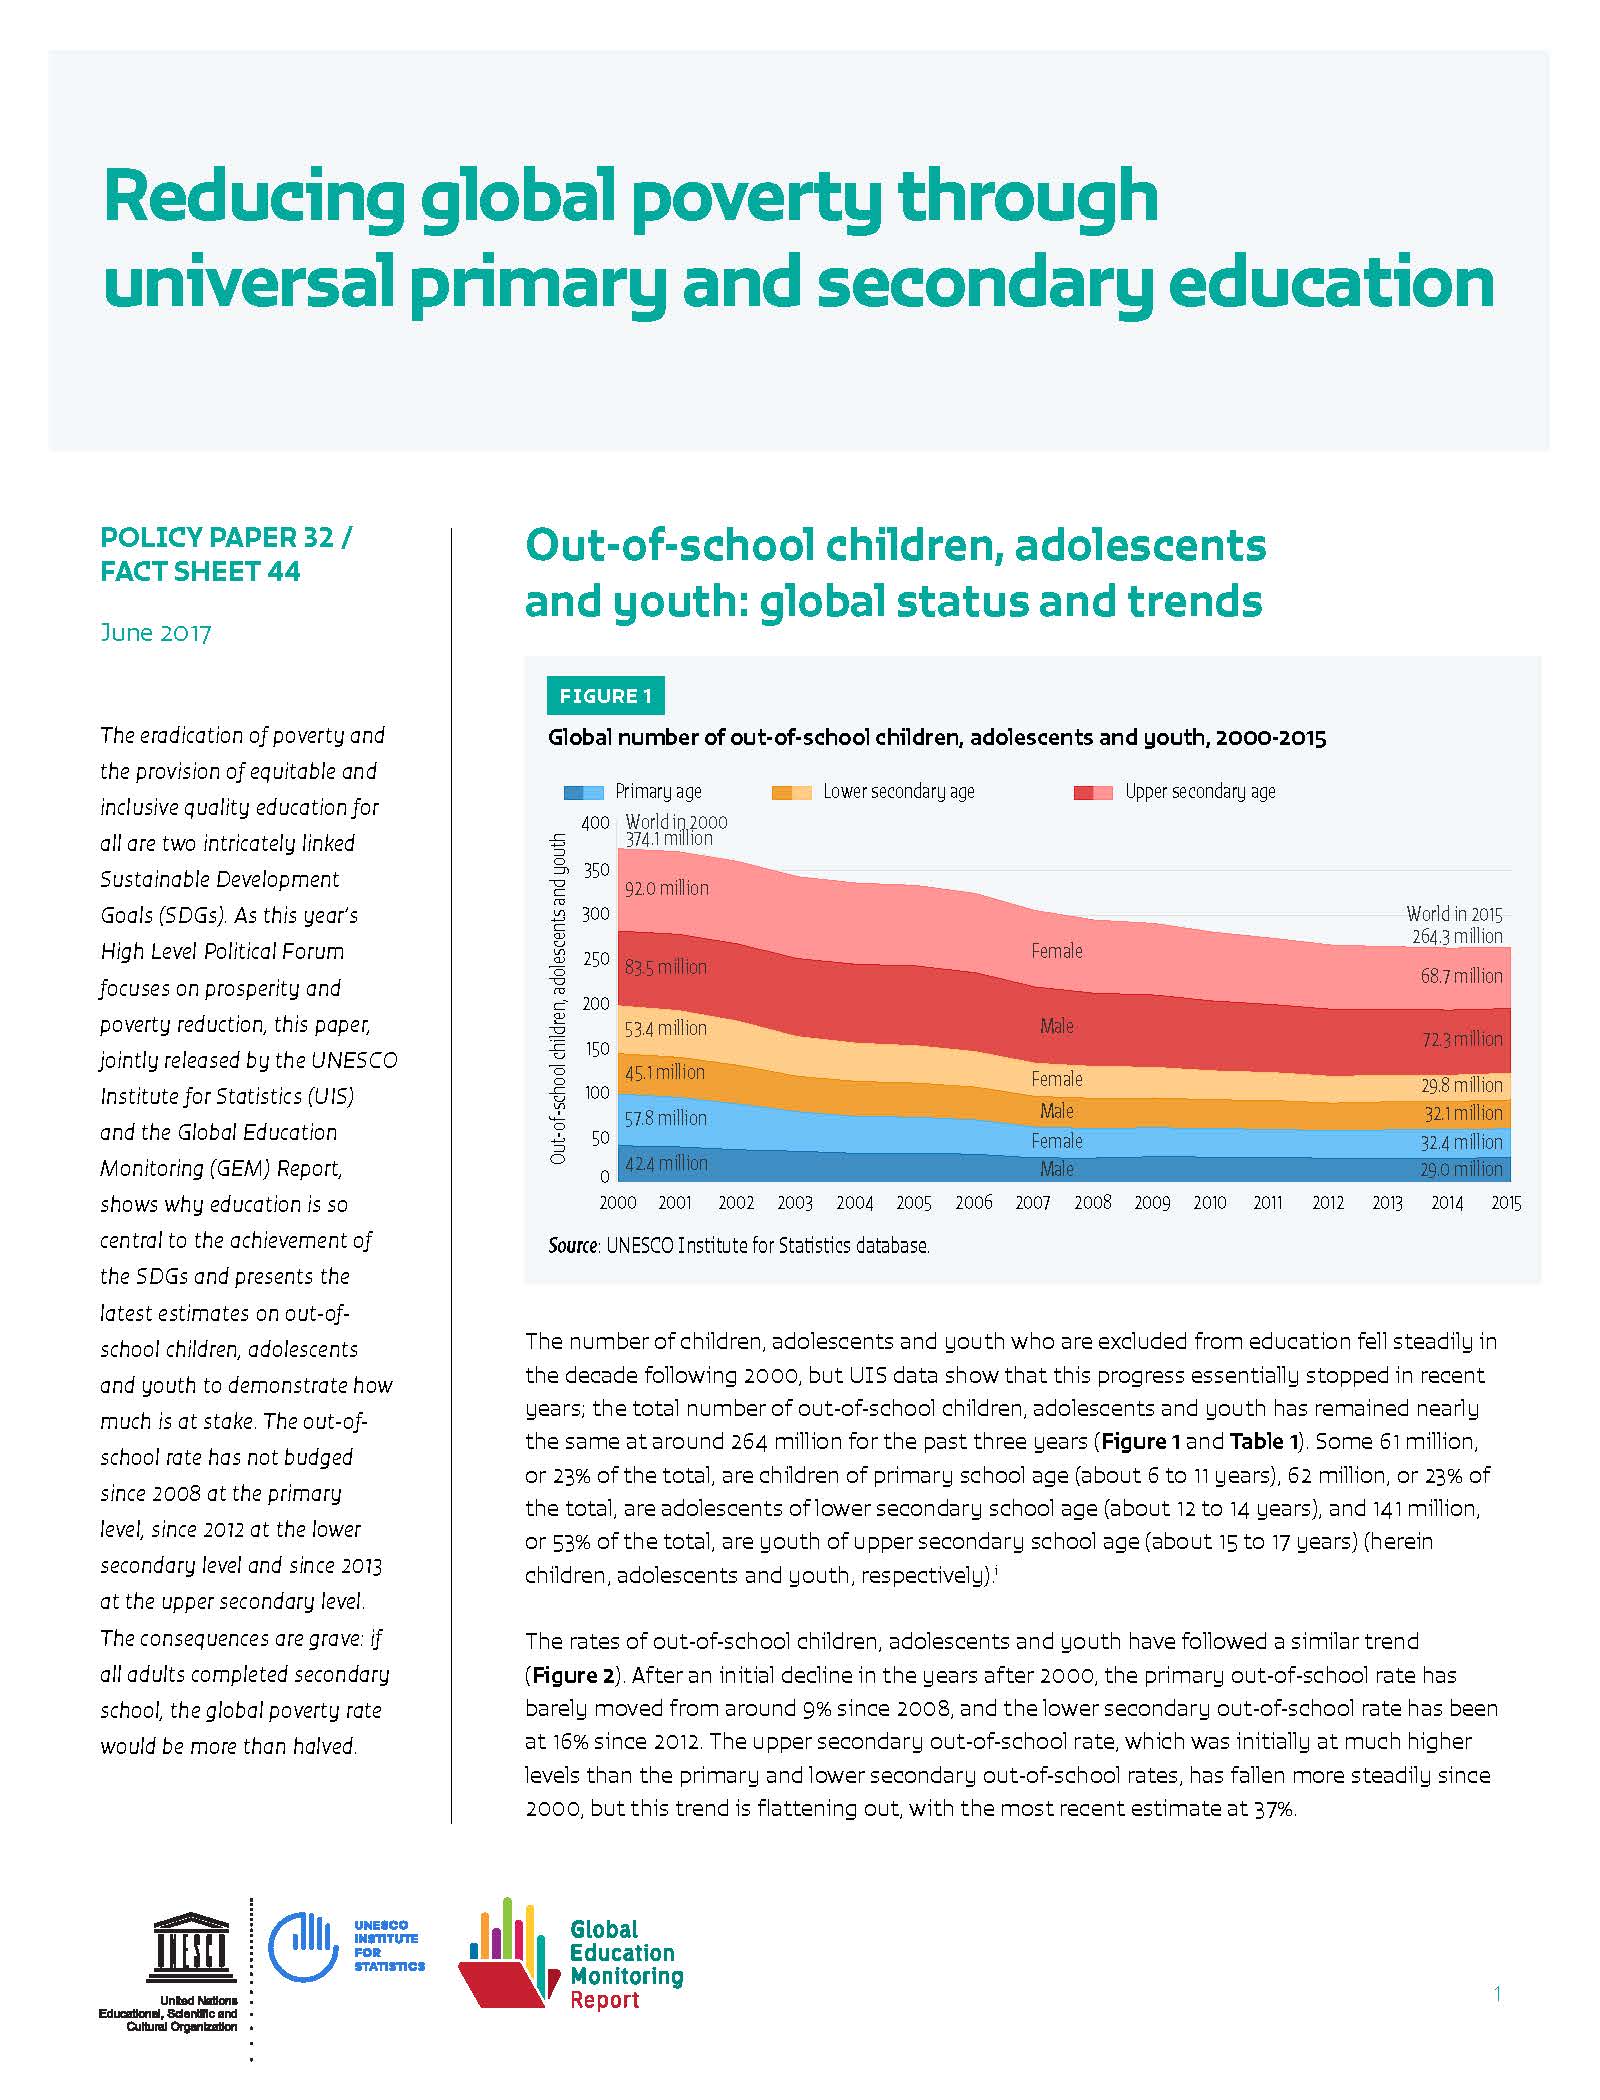 Reducing global poverty through universal primary and secondary education